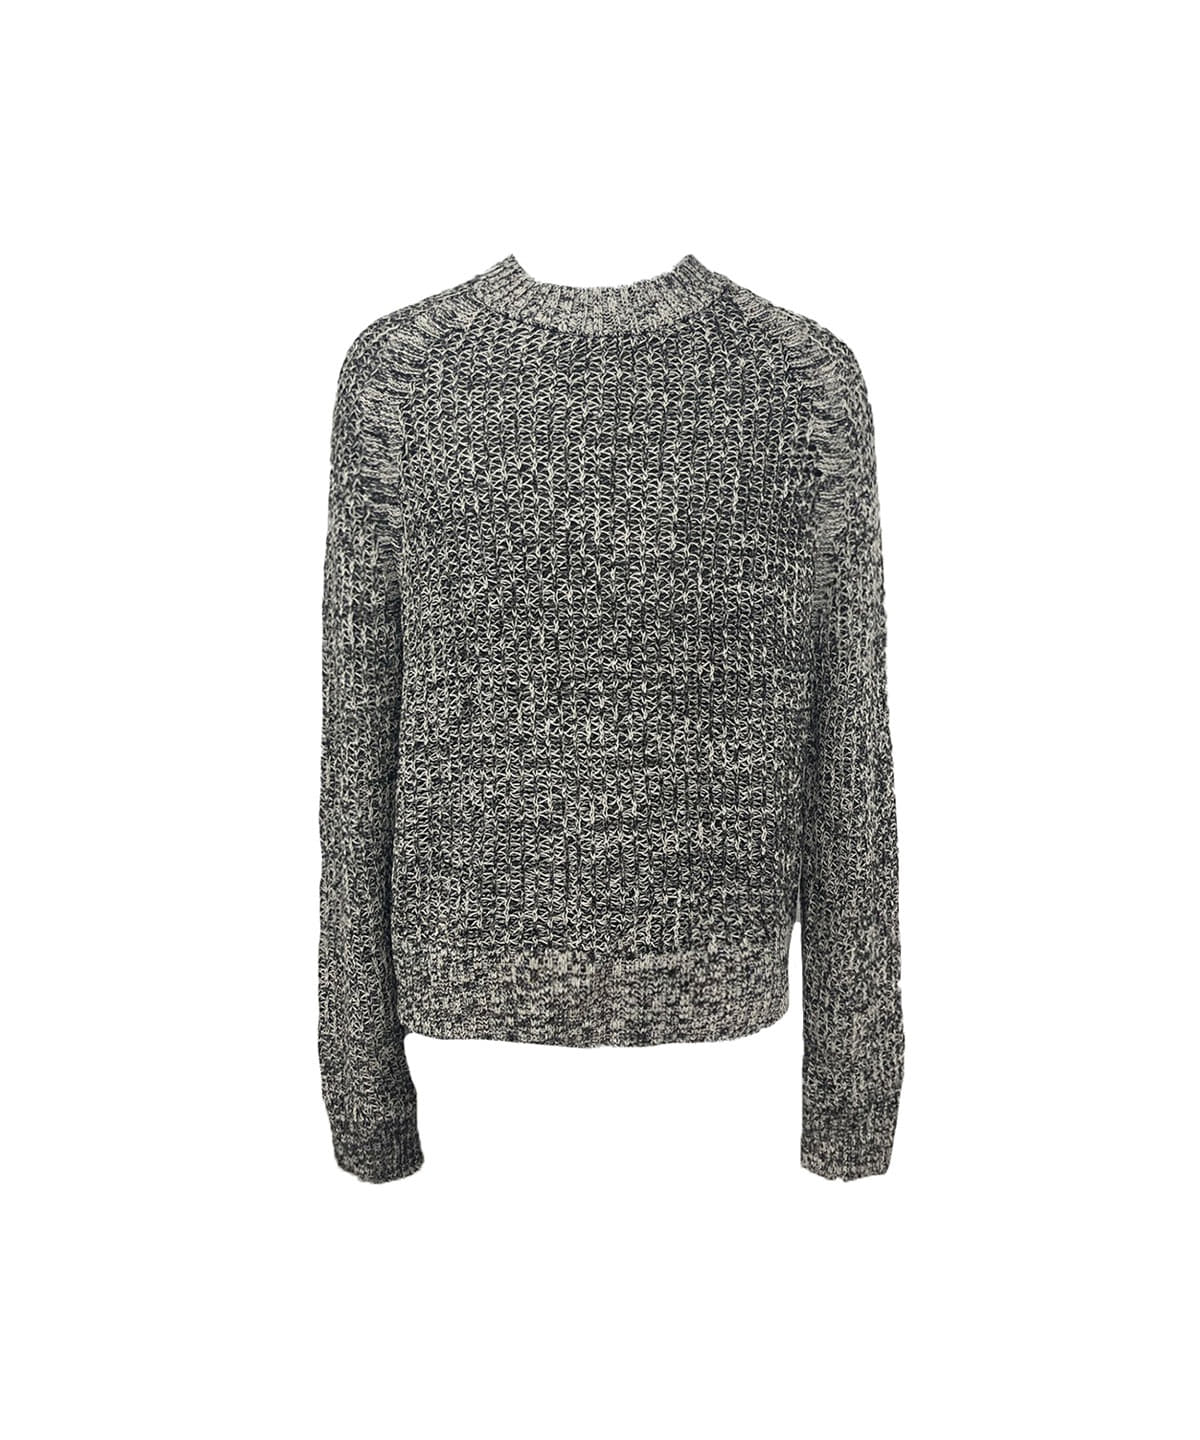 LE17SEPTEMBRE HOMME르917옴므 MESH PULLOVER GREY